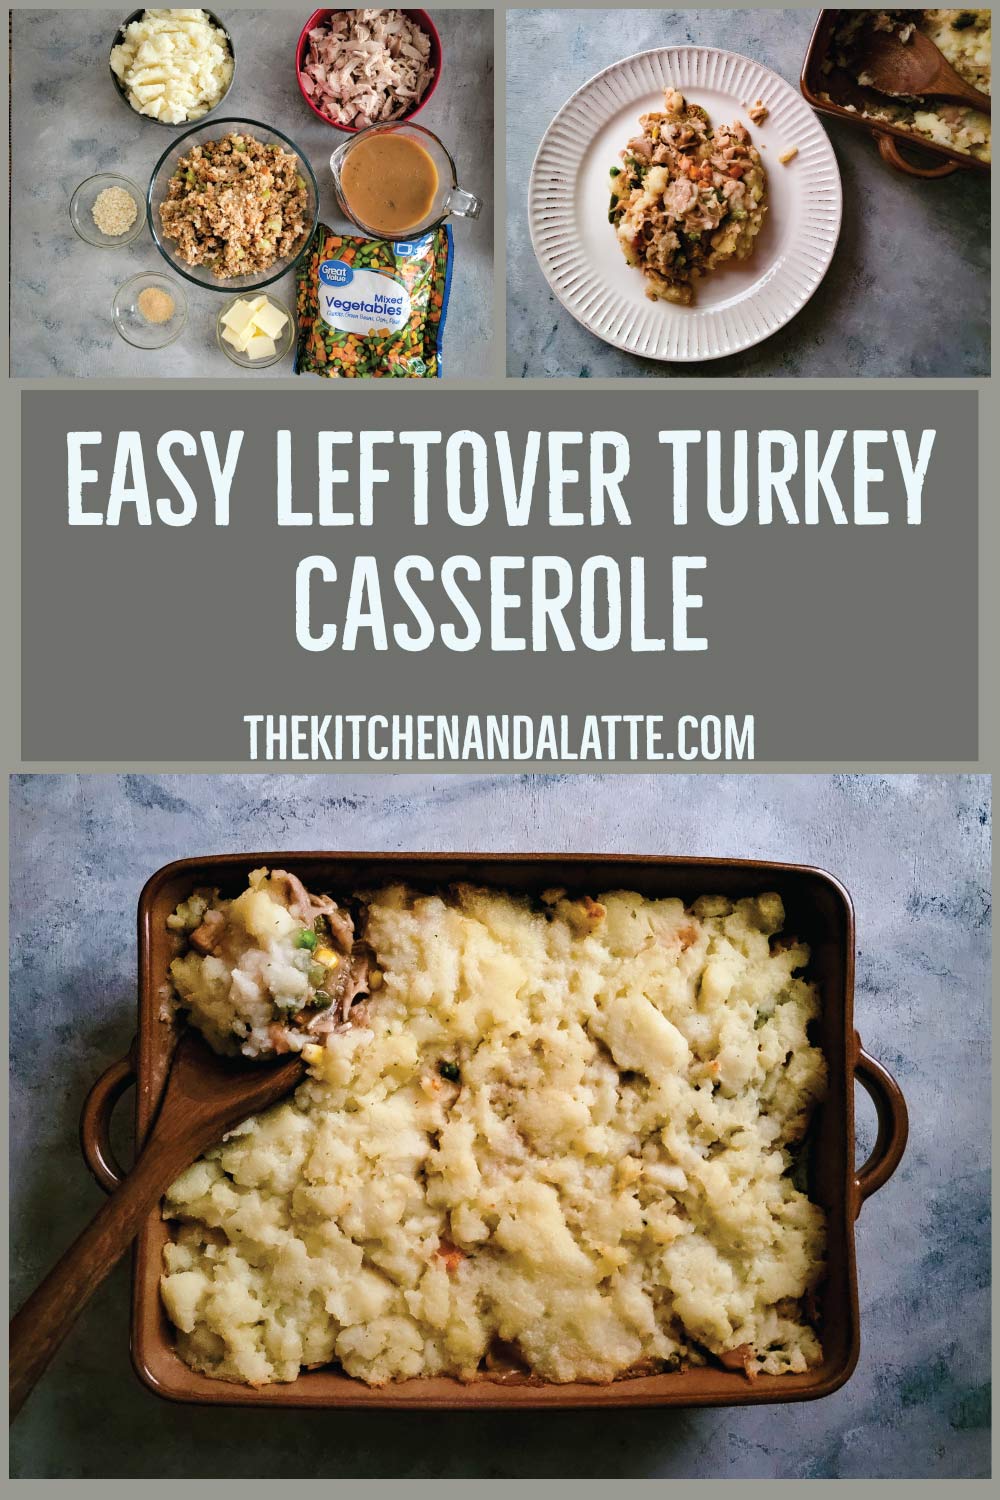 Leftover turkey casserole Pinterest image. Ingredients for casserole, turkey casserole in a baking dish and a dinner plate with the casserole ready to be eaten.